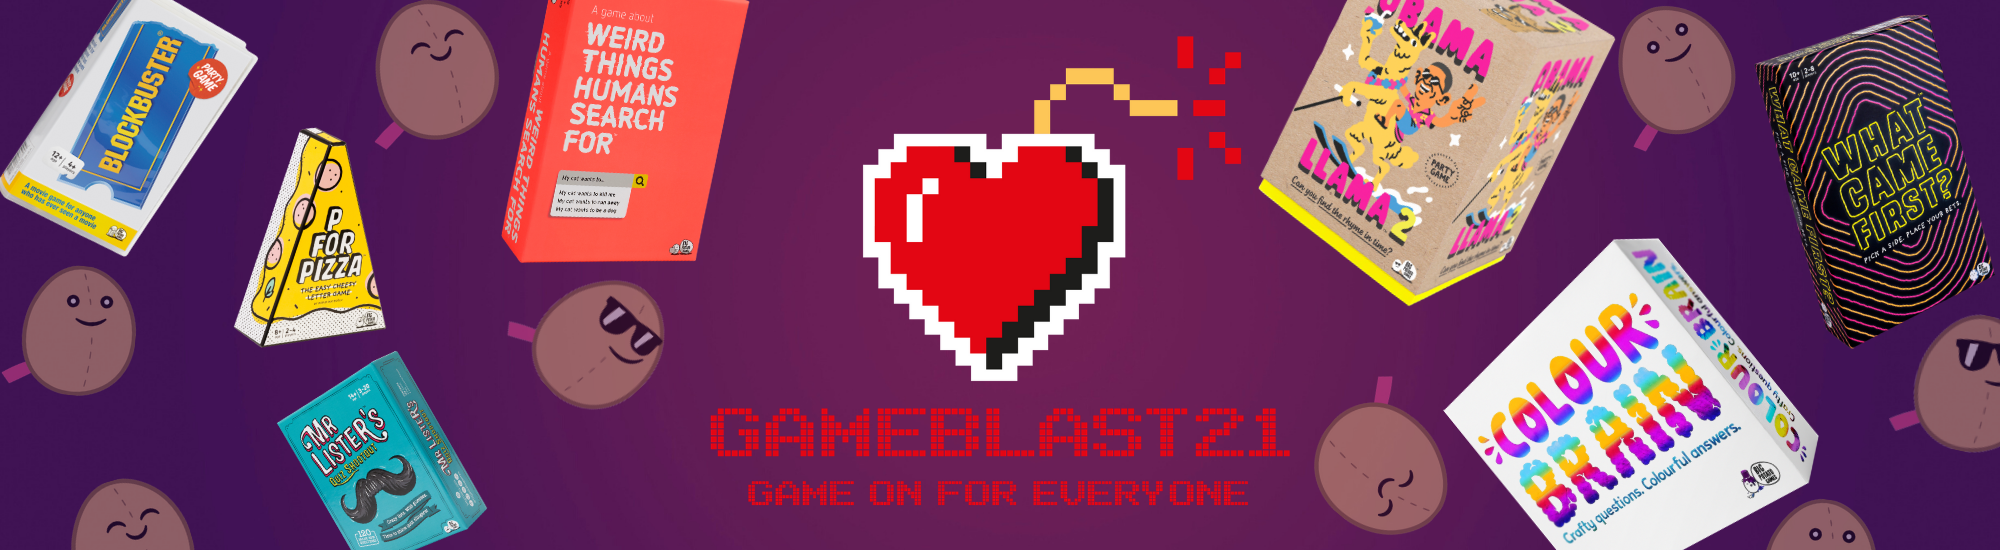 Get ready for GameBlast21 and help raise money for SpecialEffect!